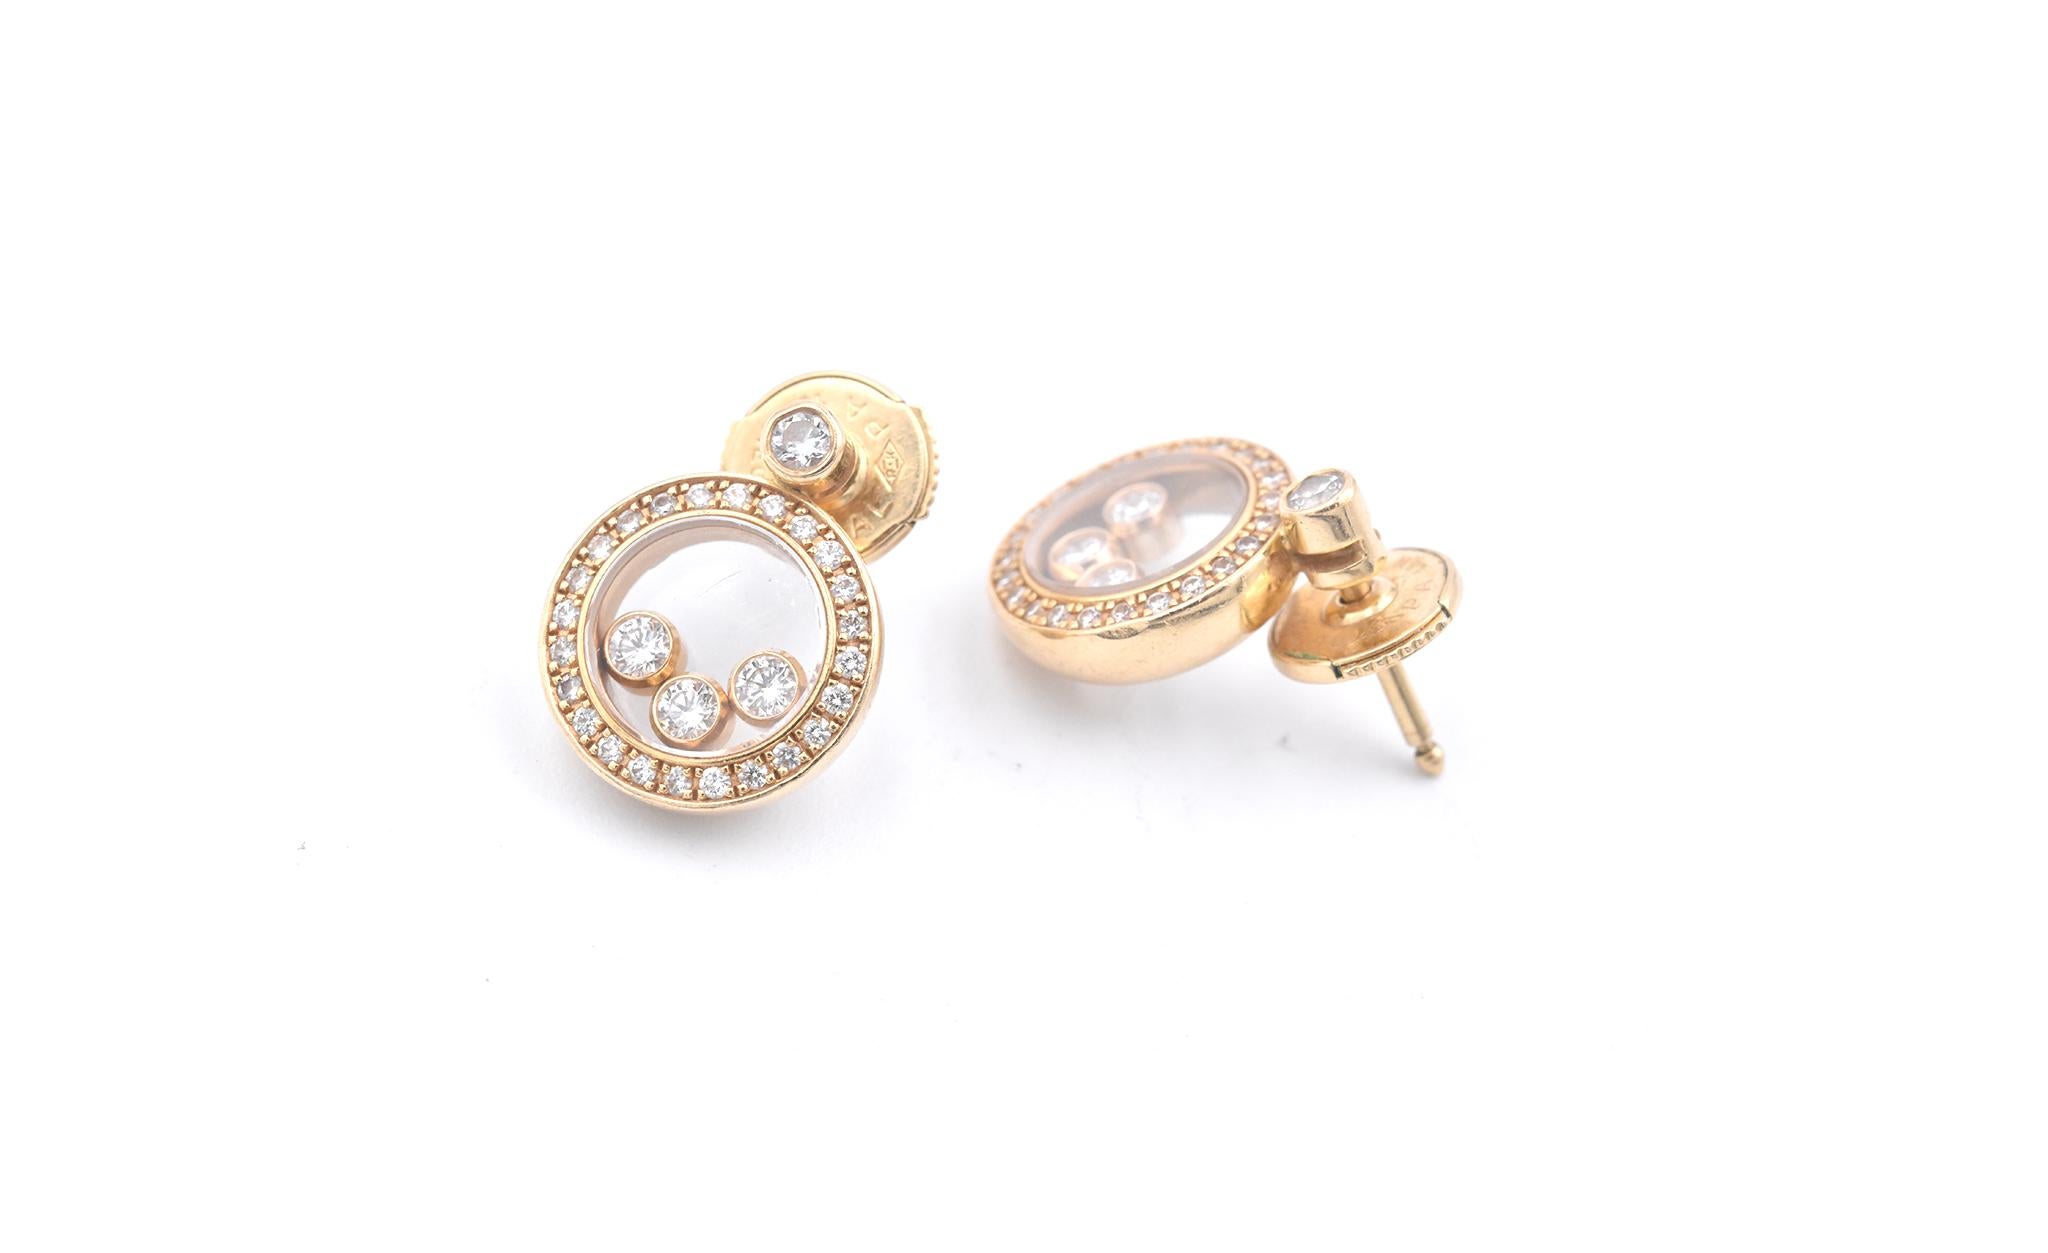 Designer: Chopard
Material: 18k yellow gold
Diamonds: 56 round brilliant cuts = 0.75 cttw
Color: G
Clarity: VS
Dimensions: the earring measures 14.45mm X 11.45mm
Weight: 6.95 grams
